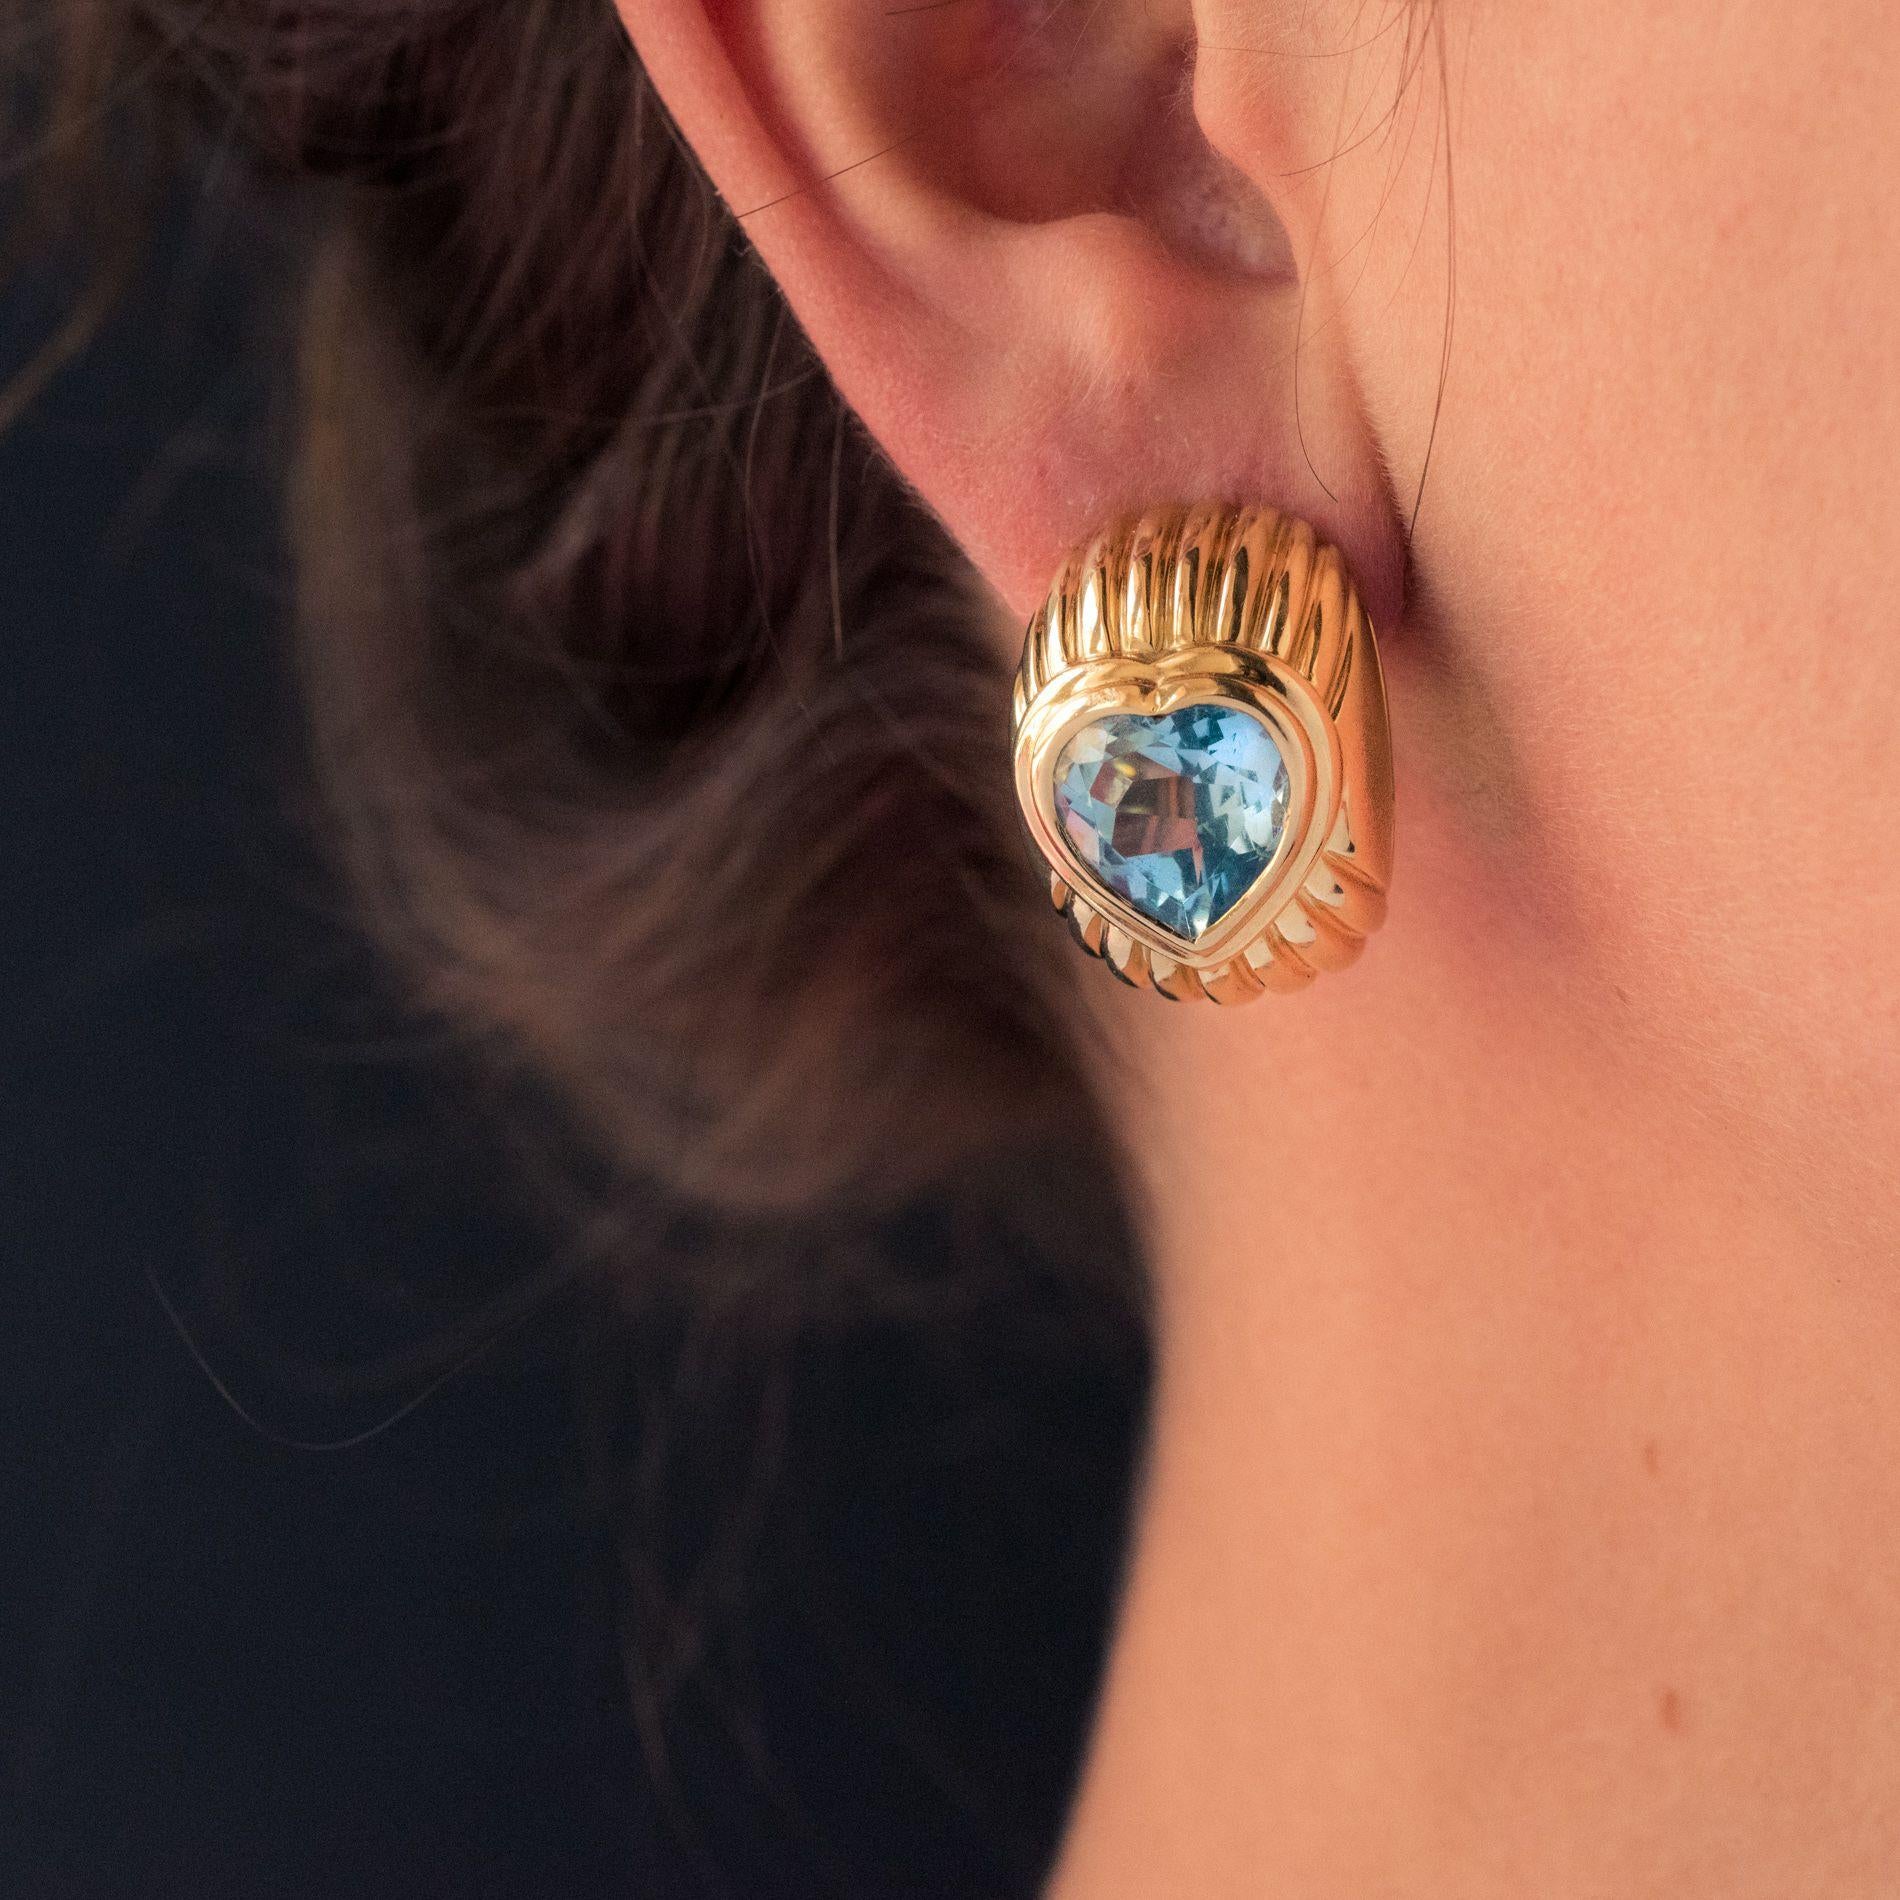 Earrings in 18 karat yellow gold, eagle head hallmark.
This splendid pair of gold earrings is formed of a curved and gadrooned pattern set in the center of a splendid and luminous topaz cut in heart. The fastening system is a stud with safety